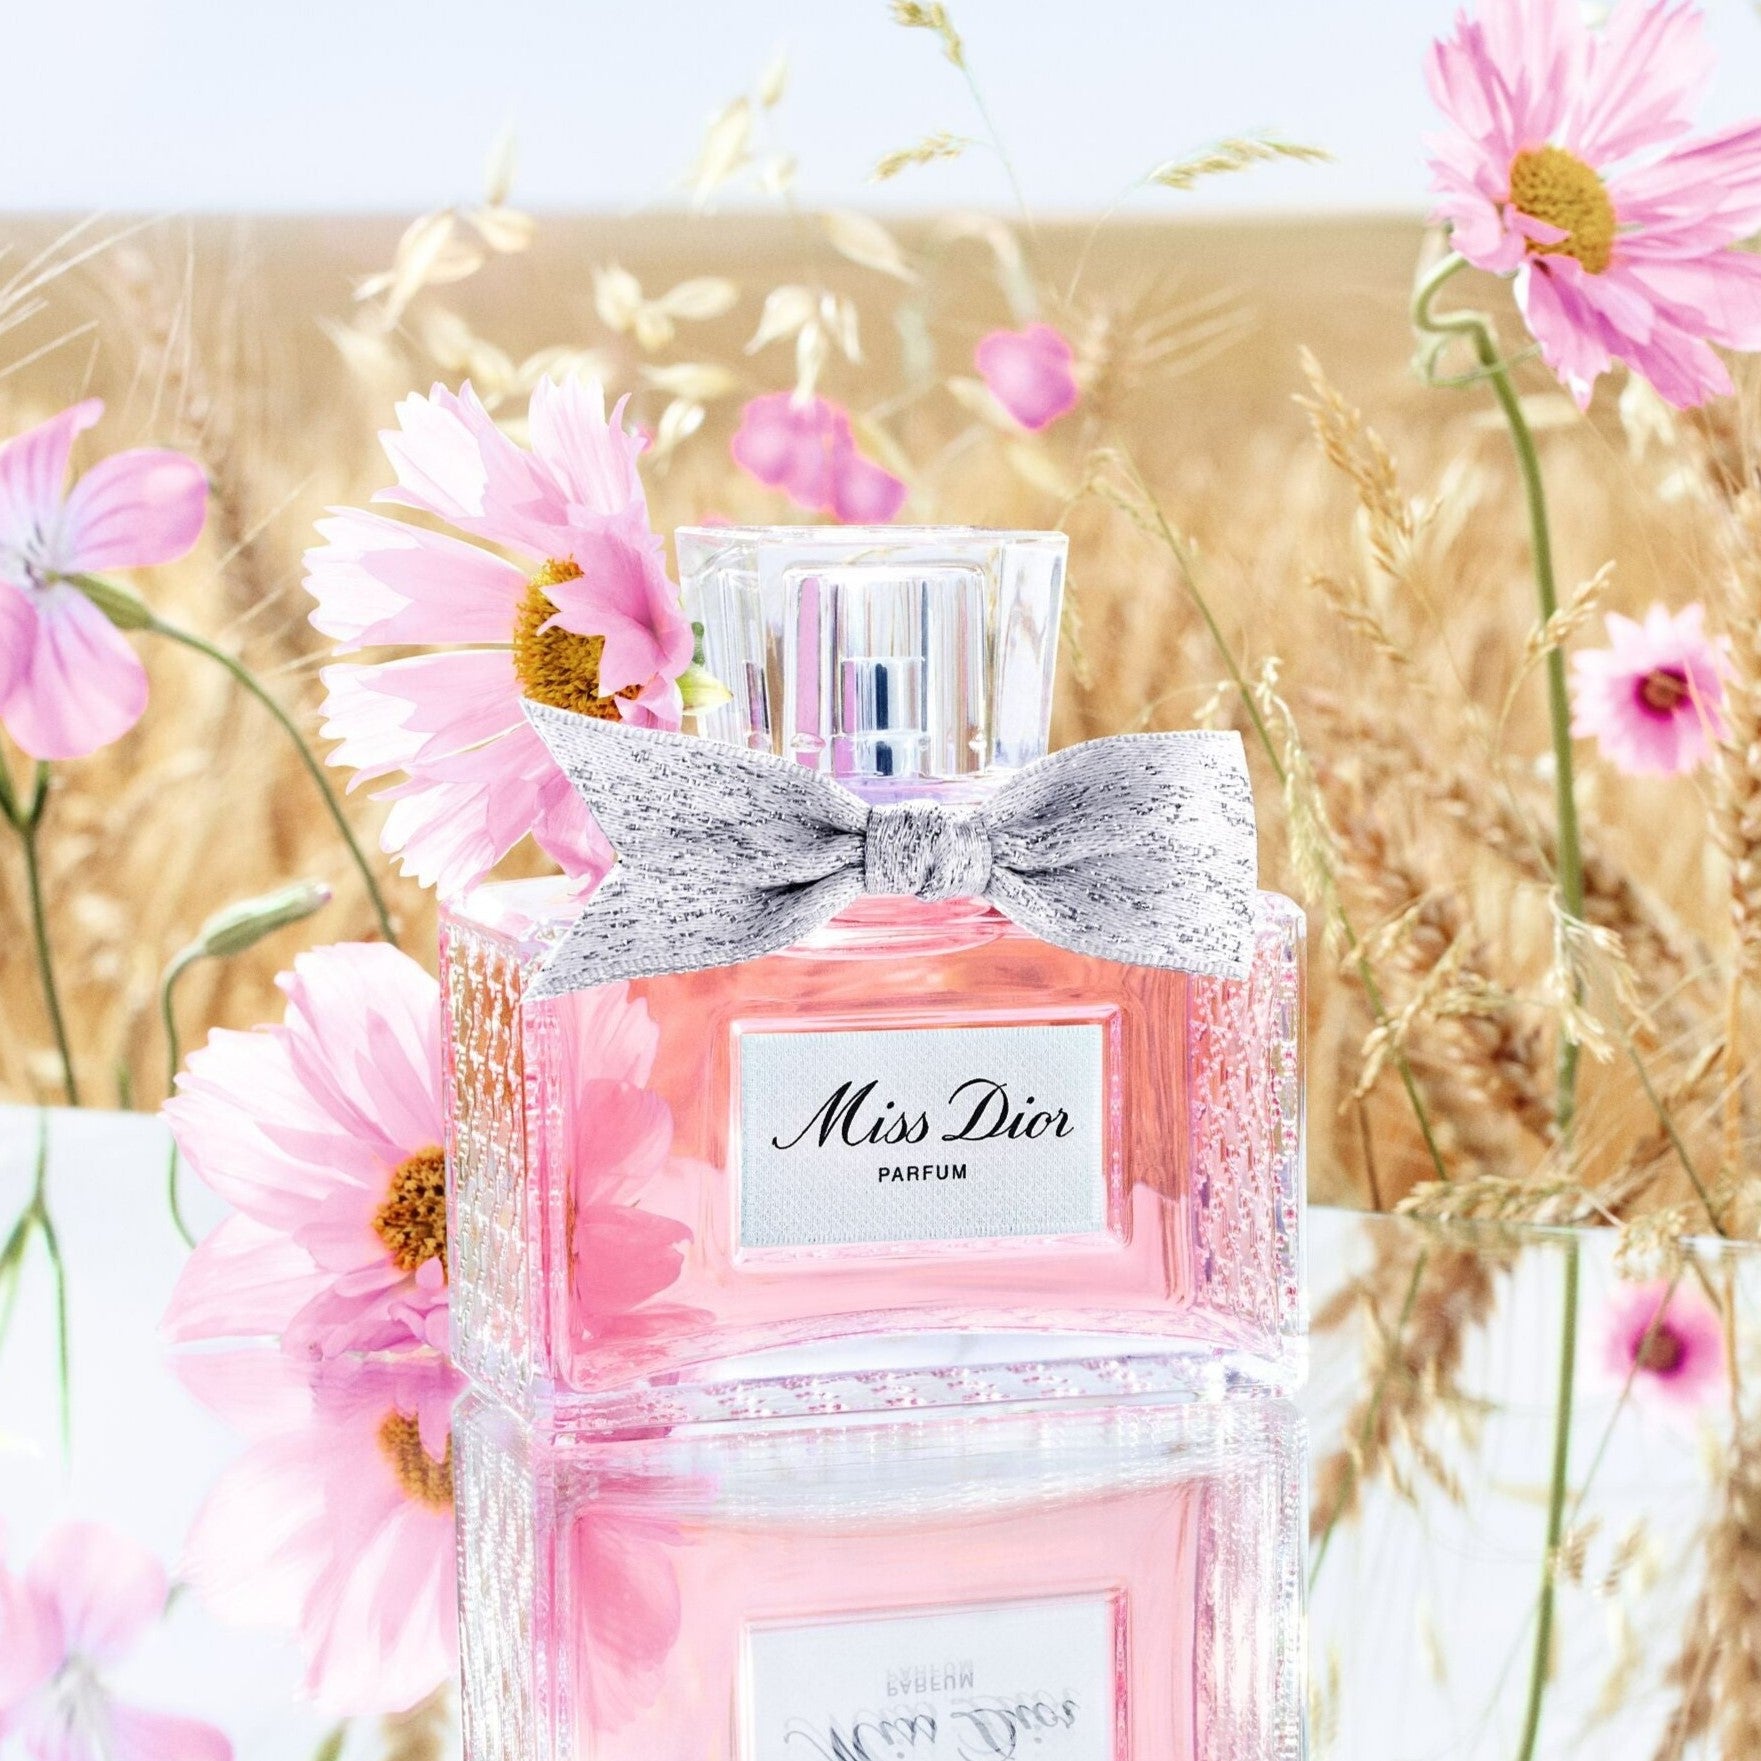 MISS DIOR PARFUM | Parfum - Intense Floral, Fruity and Woody Notes